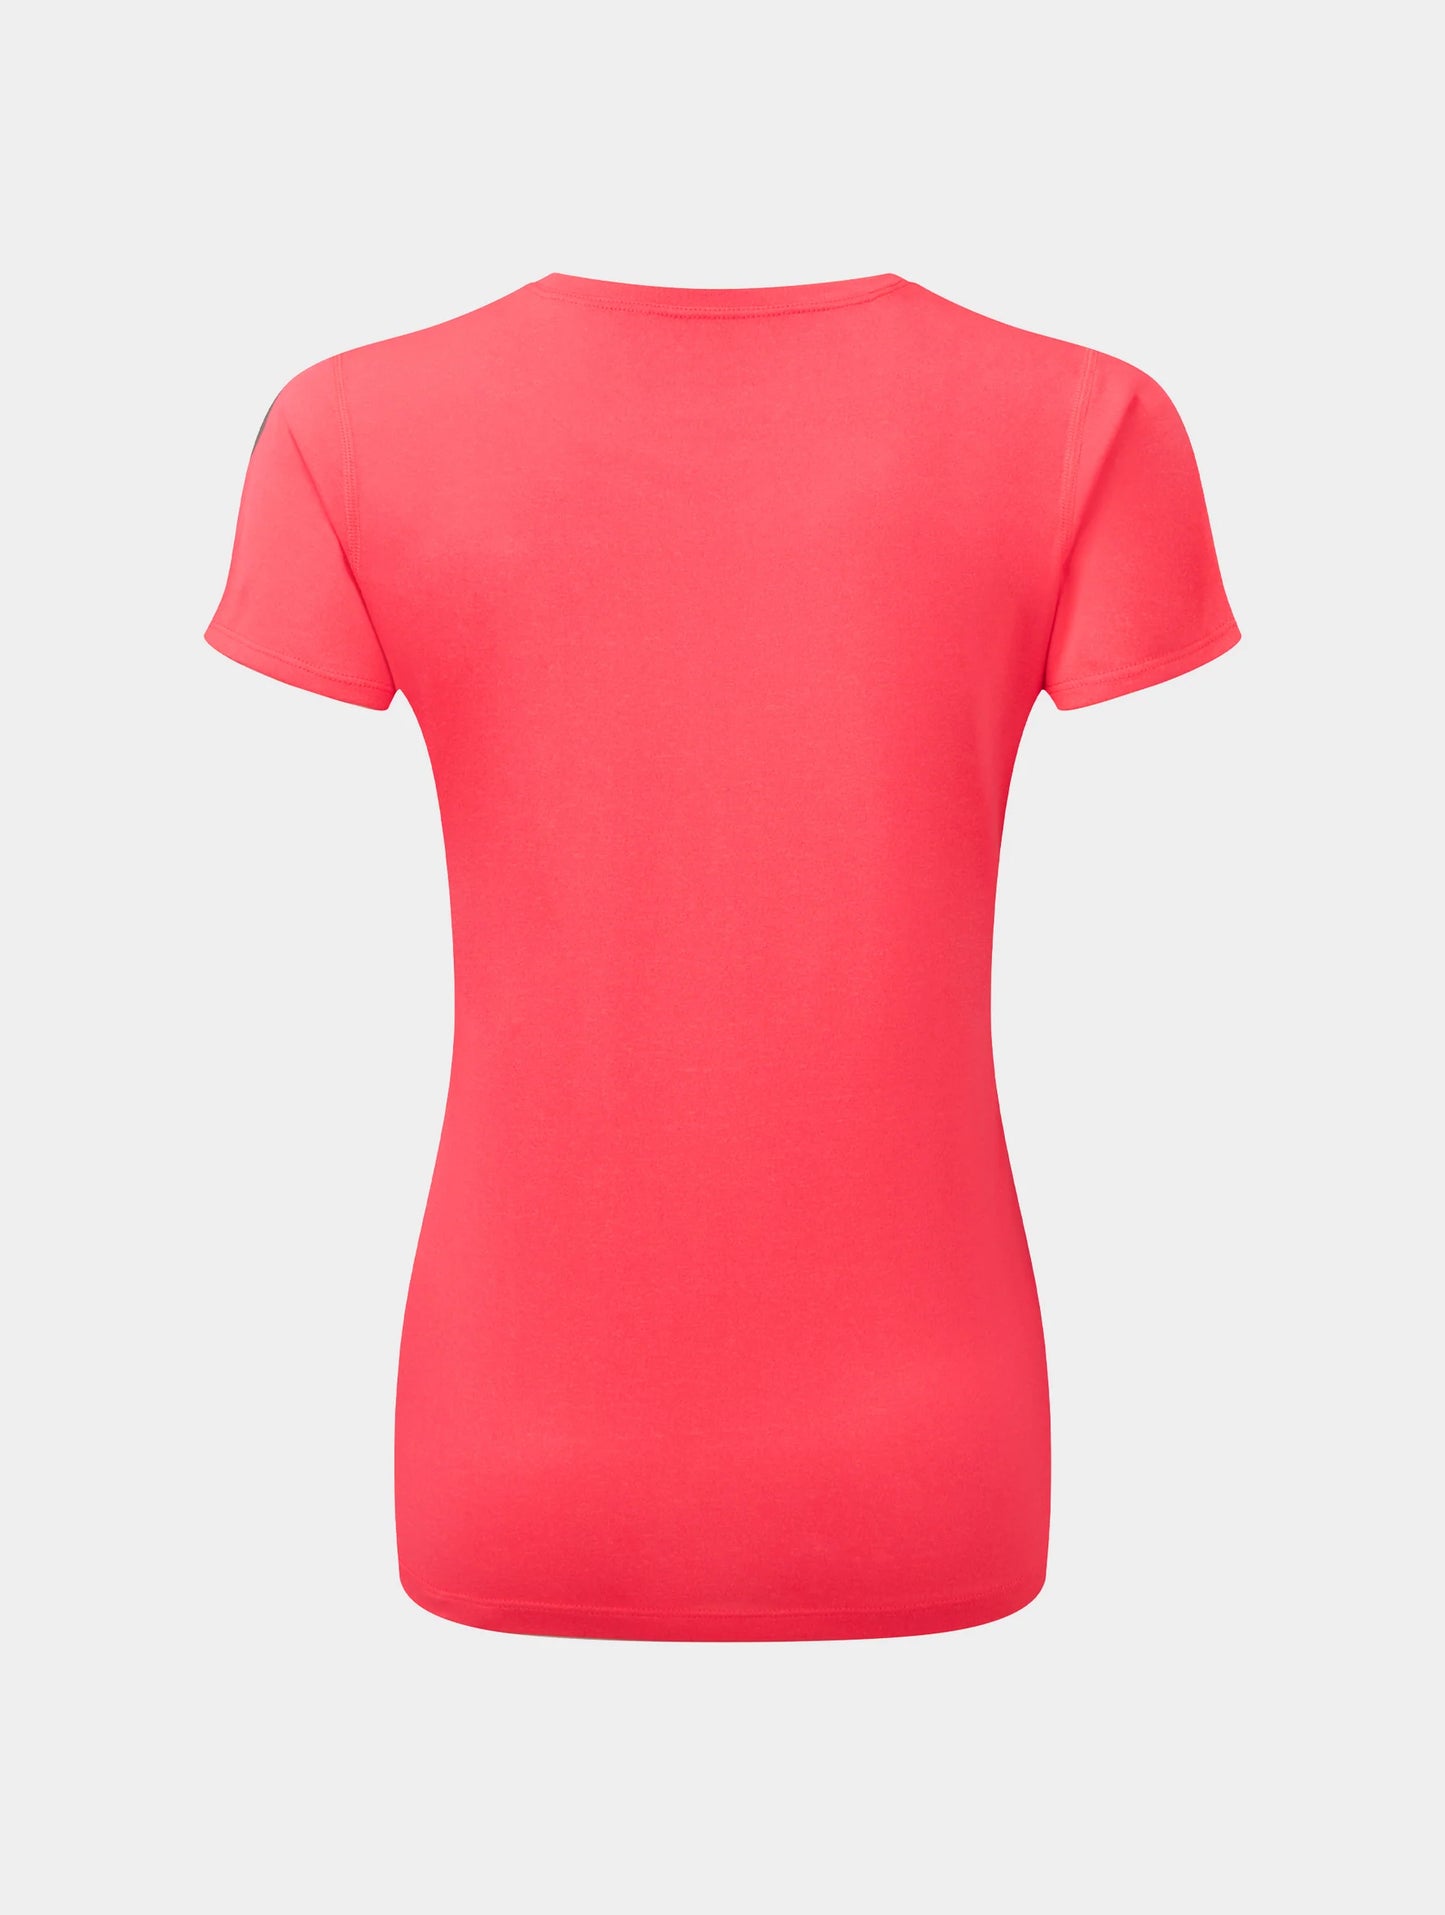 Ronhill Core SS Tee | Womens